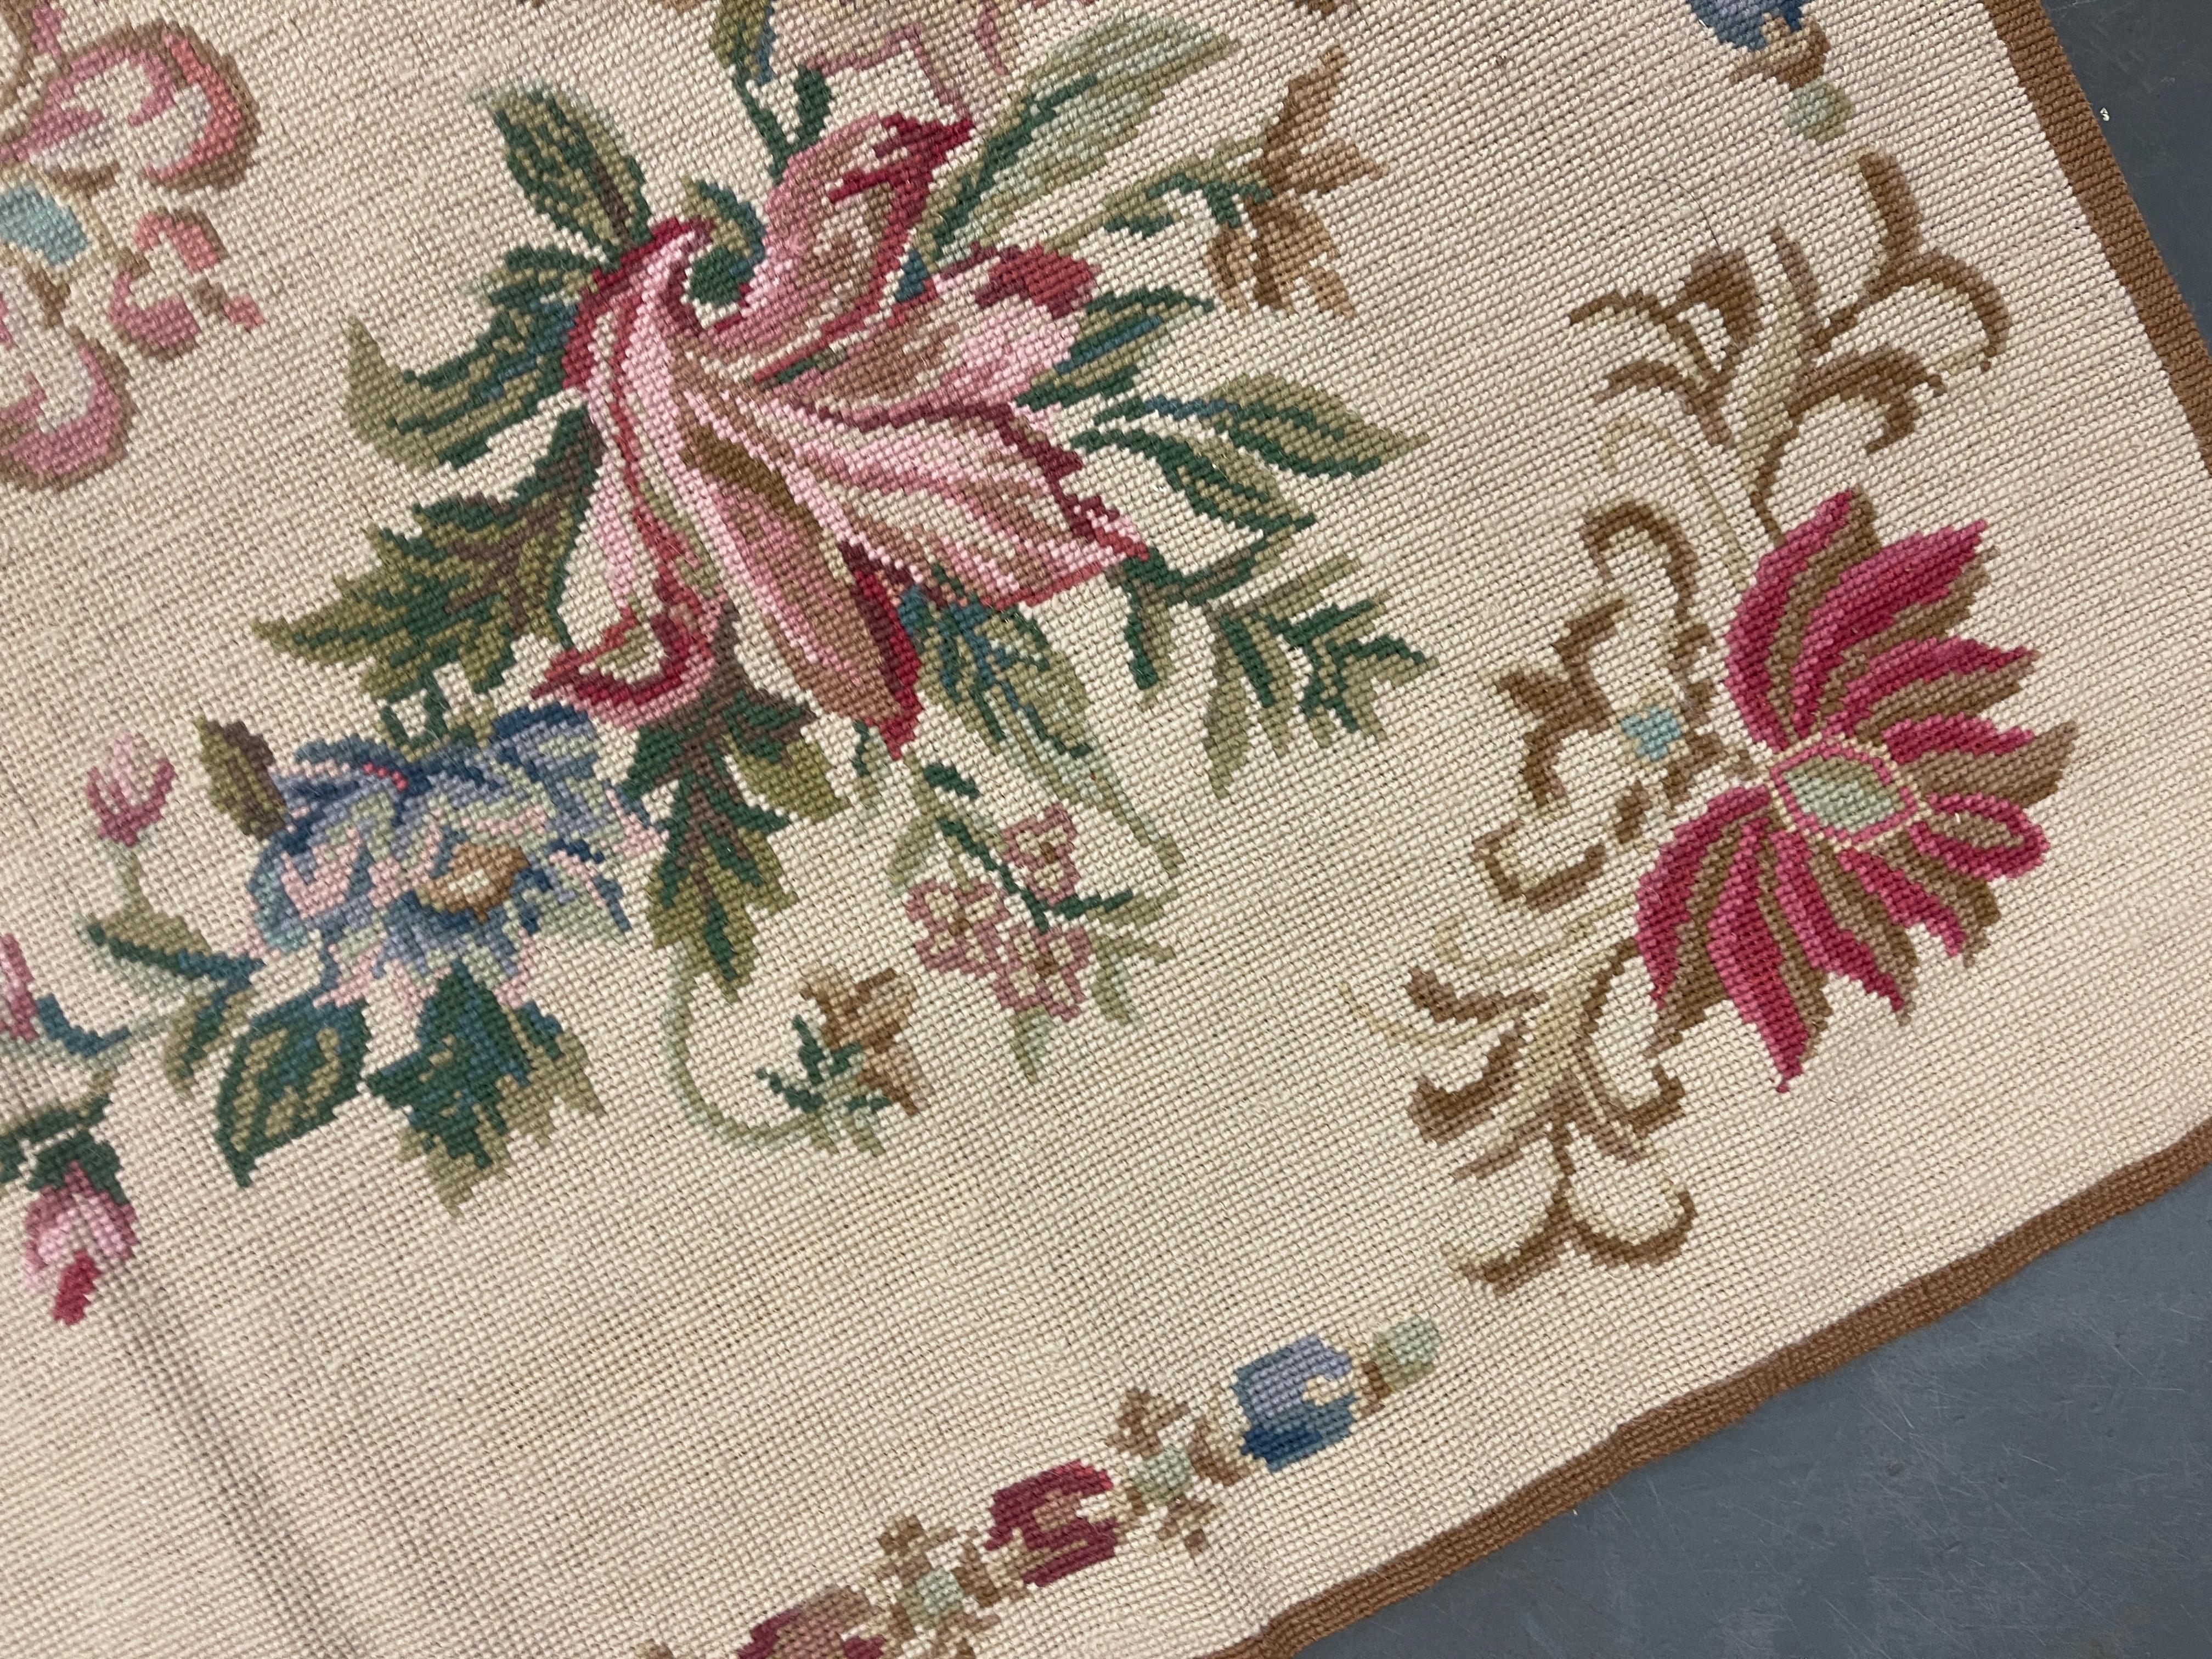 This fantastic large needlepoint rug has been handwoven with a beautiful repeat bunch of floral designs woven on an ivory blue background with cream-green and pink accents. This elegant piece's colour and design make it the perfect accent rug.
This